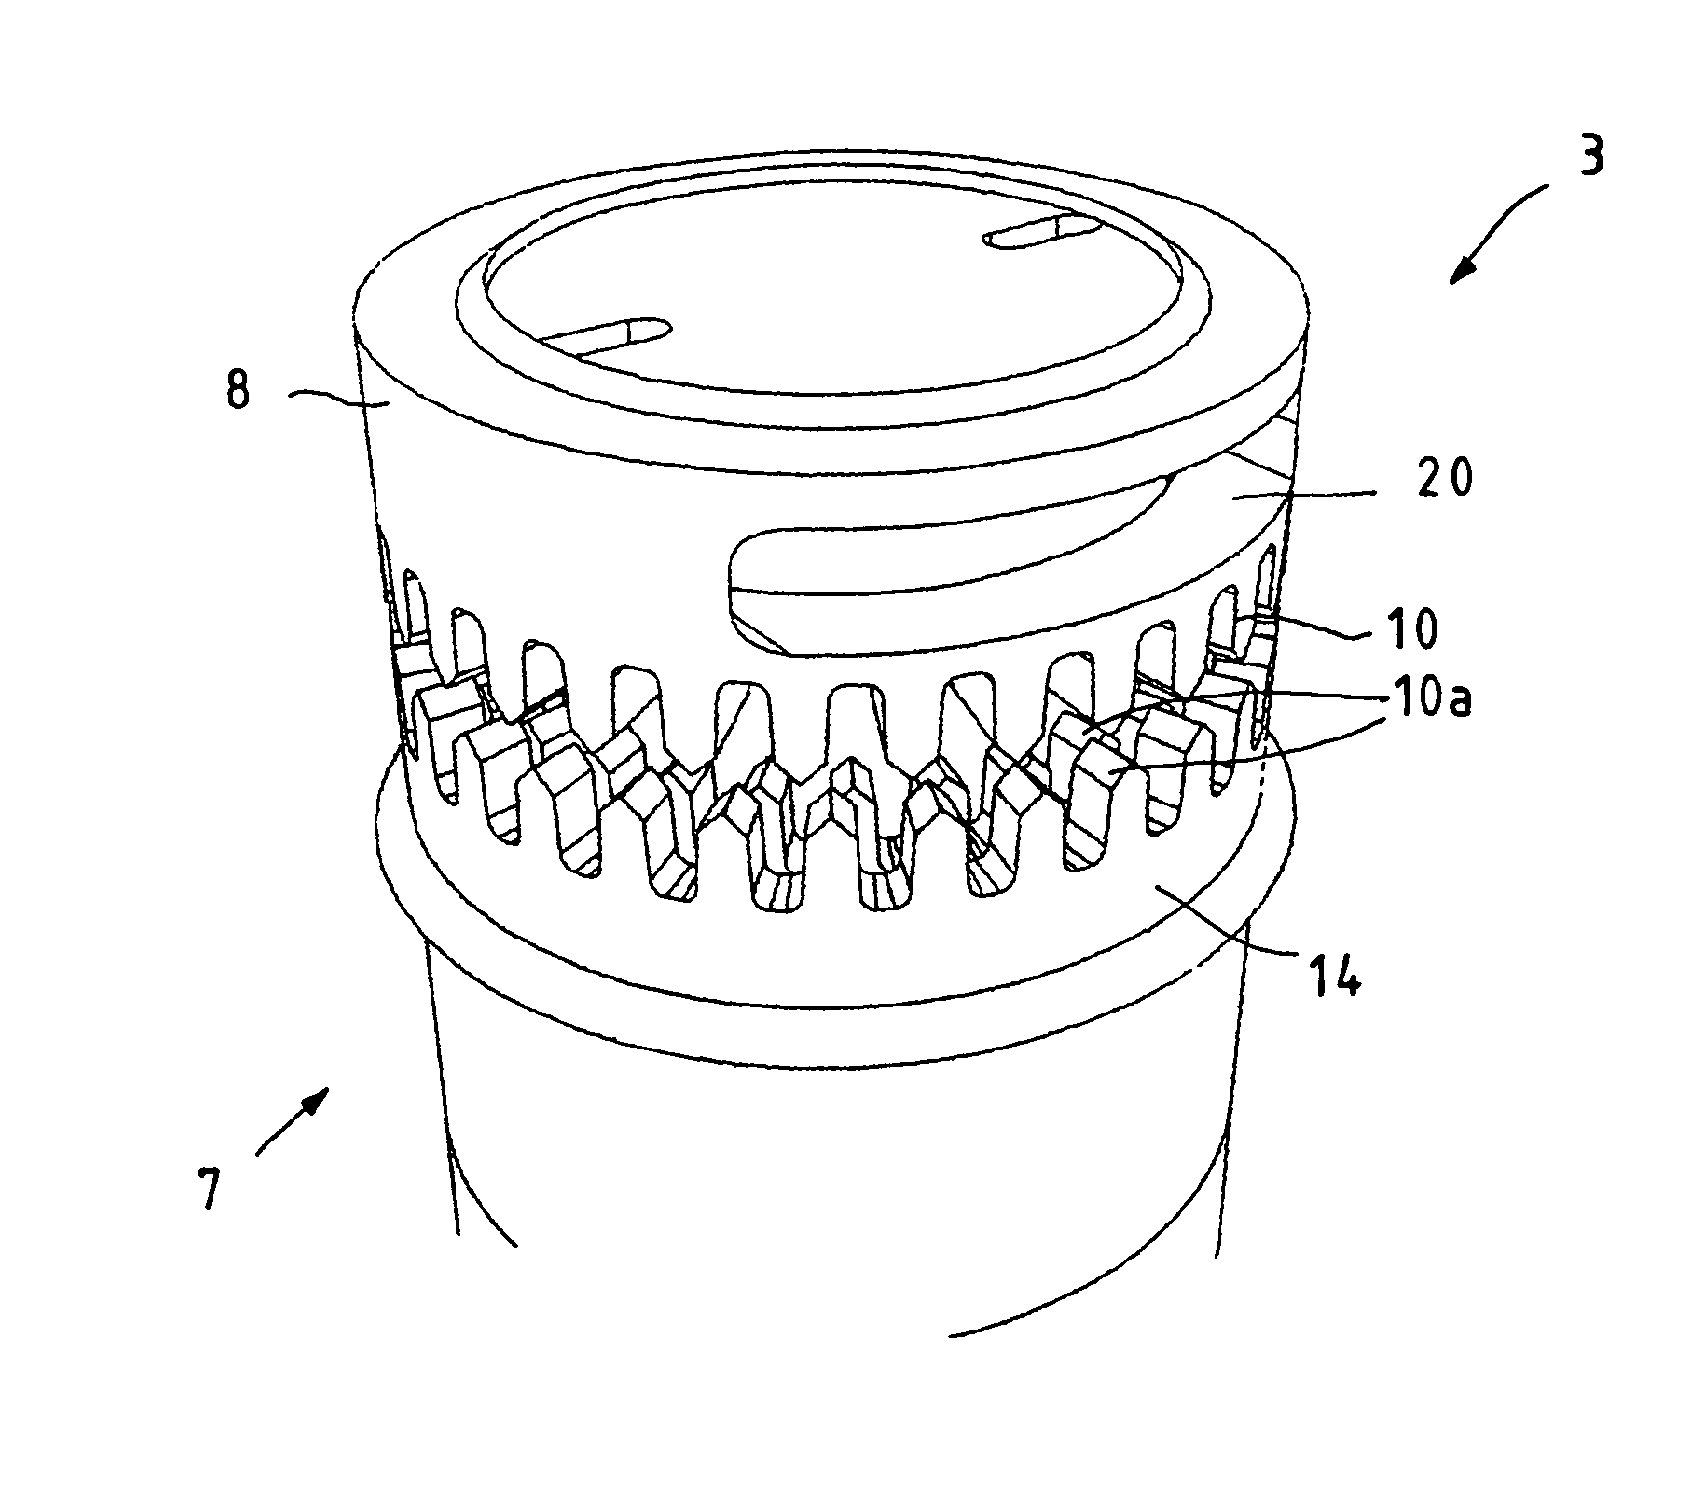 Holding device for medical purposes